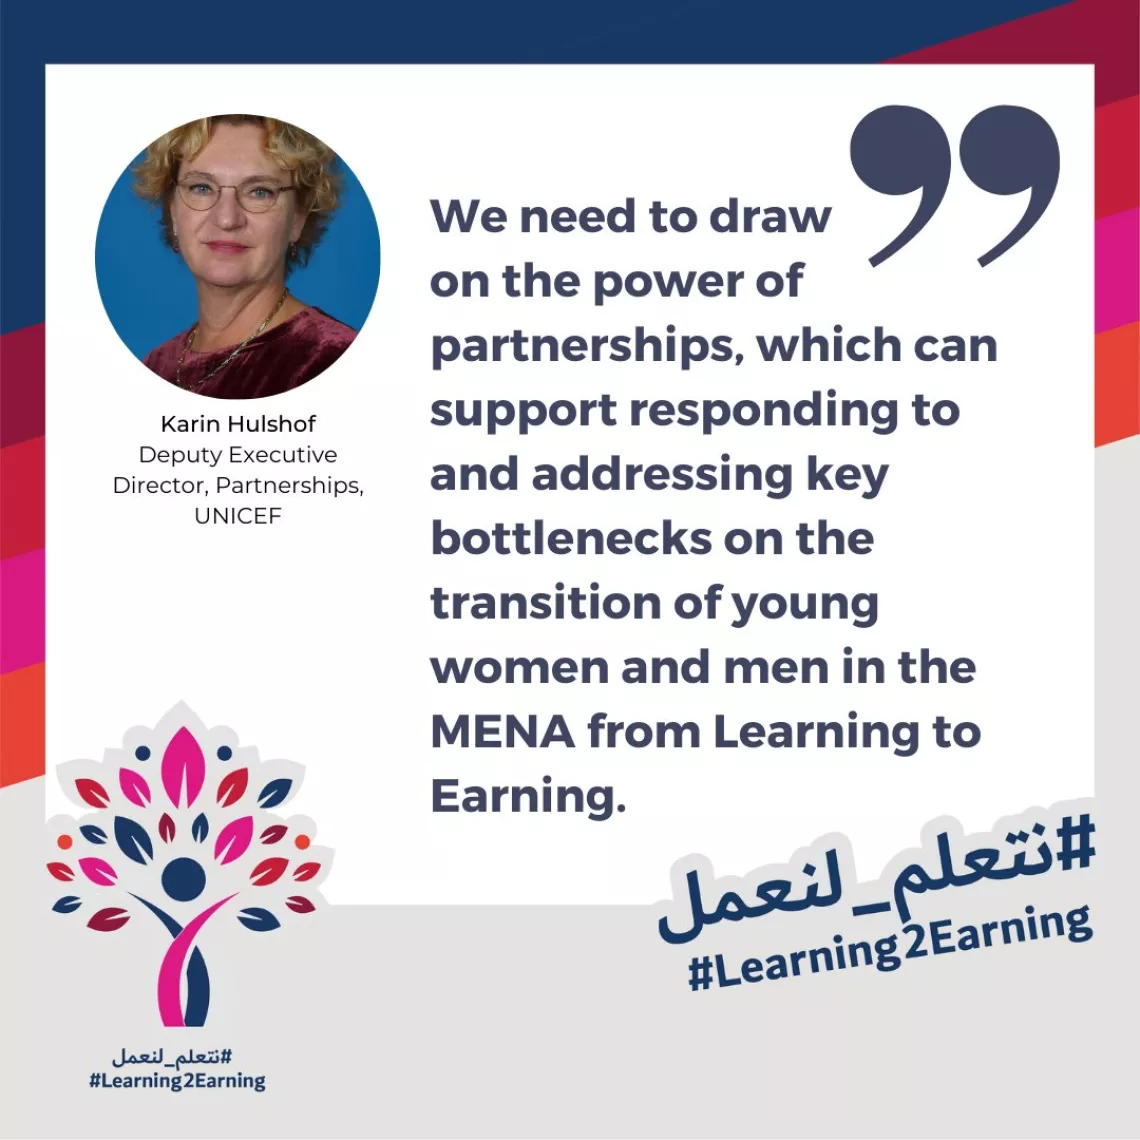 Quote card of Karin Hulshof Deputy Executive Director, Partnerships, UNICEF: "We need to draw  on the power of partnerships, which can support responding to  and addressing key bottlenecks on the transition of young women and men in the MENA from Learning to Earning."